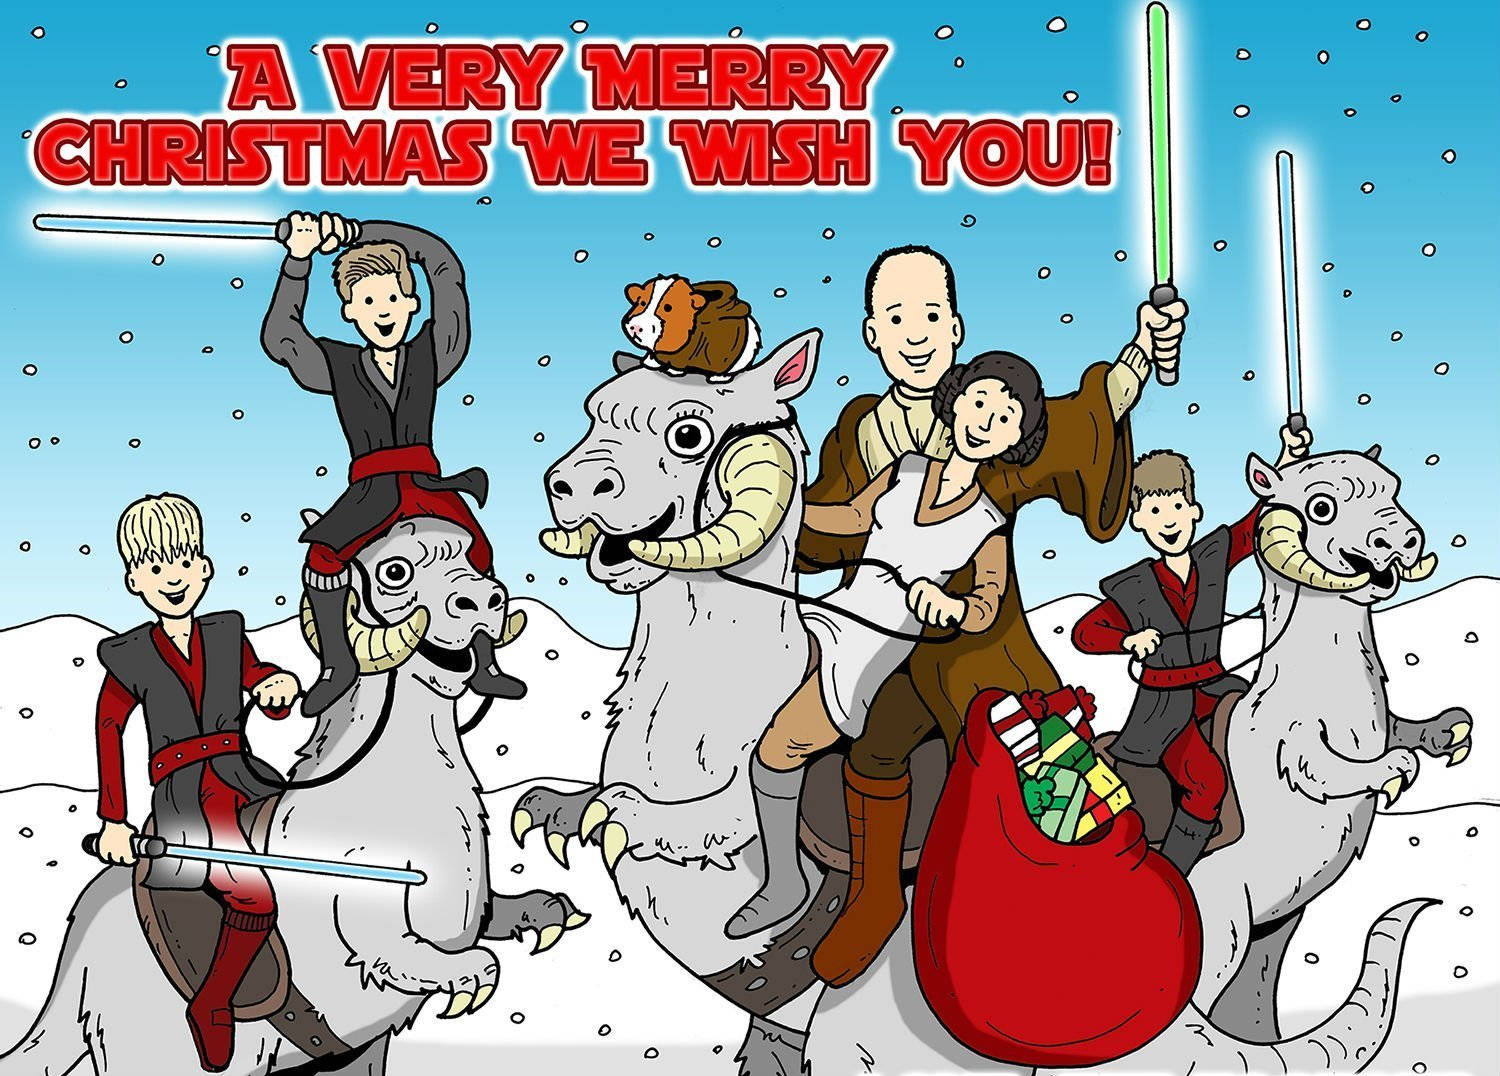 Celebrate The Holidays With A Star Wars-themed Christmas Wallpaper